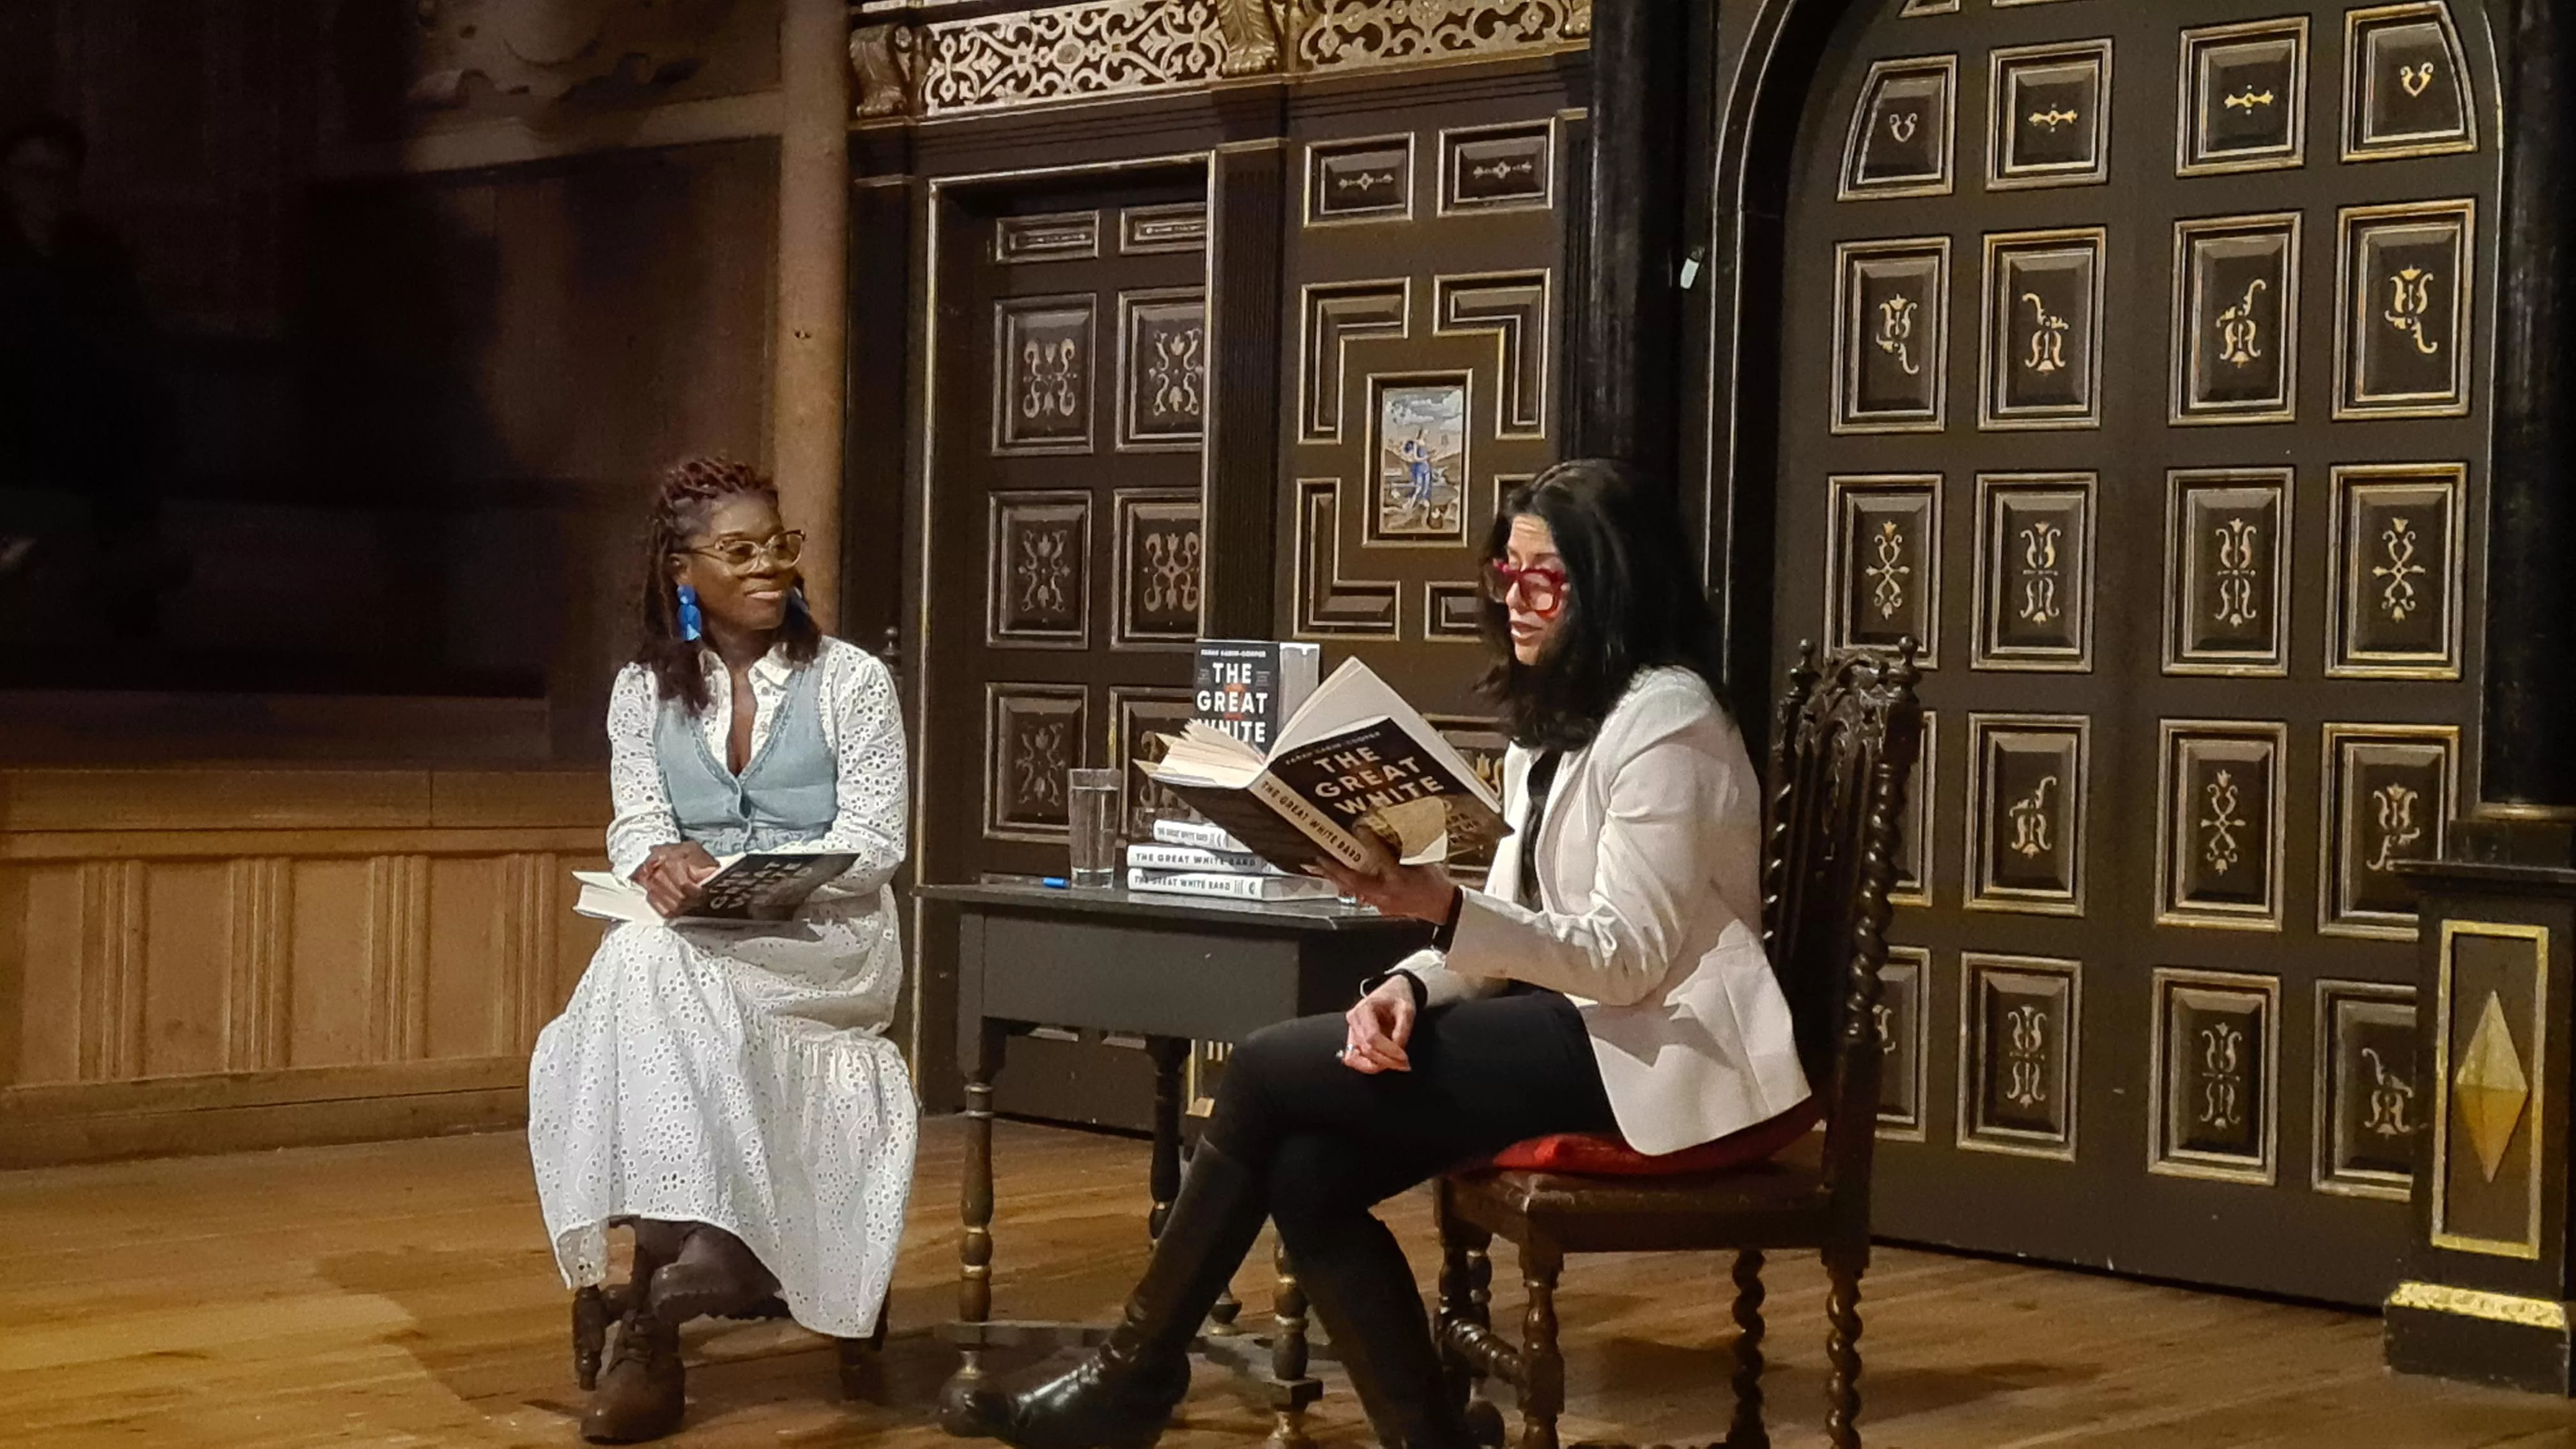 Professor Farah Karim-Cooper reading excerpts from The Great White Bard during the book launch at Shakespeare's Globe, in conversation with Akiya Henry